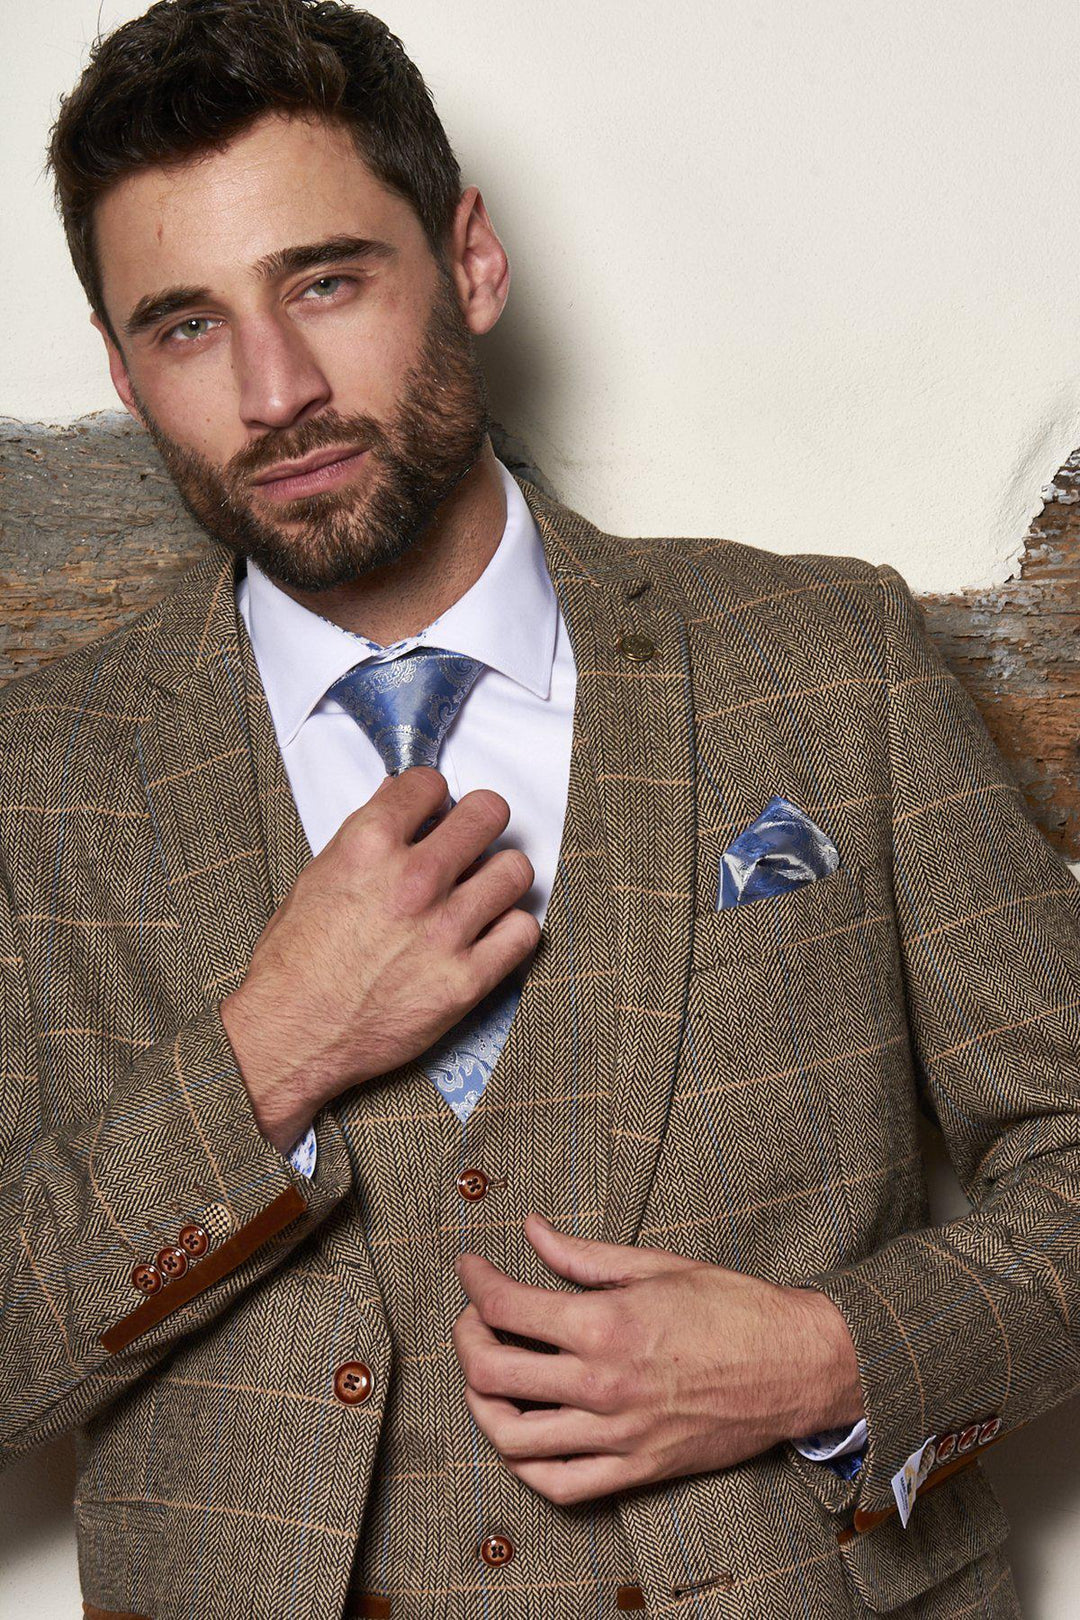 Matching Father & Son | Men’s TED Tan Tweed Check Three Piece Suit